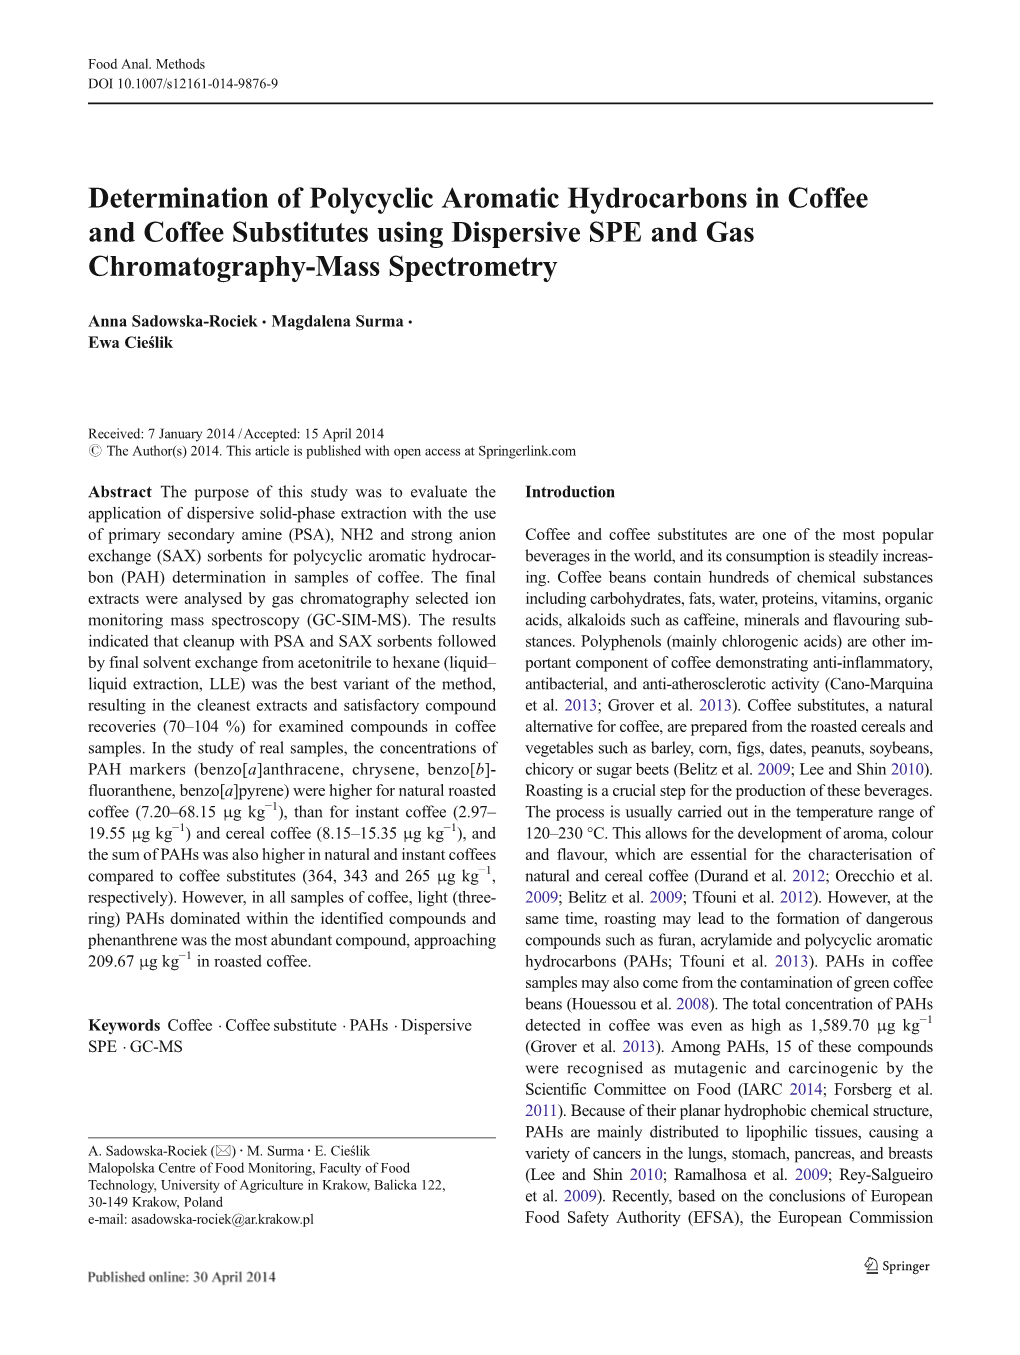 Determination of Polycyclic Aromatic Hydrocarbons in Coffee and Coffee Substitutes Using Dispersive SPE and Gas Chromatography-Mass Spectrometry